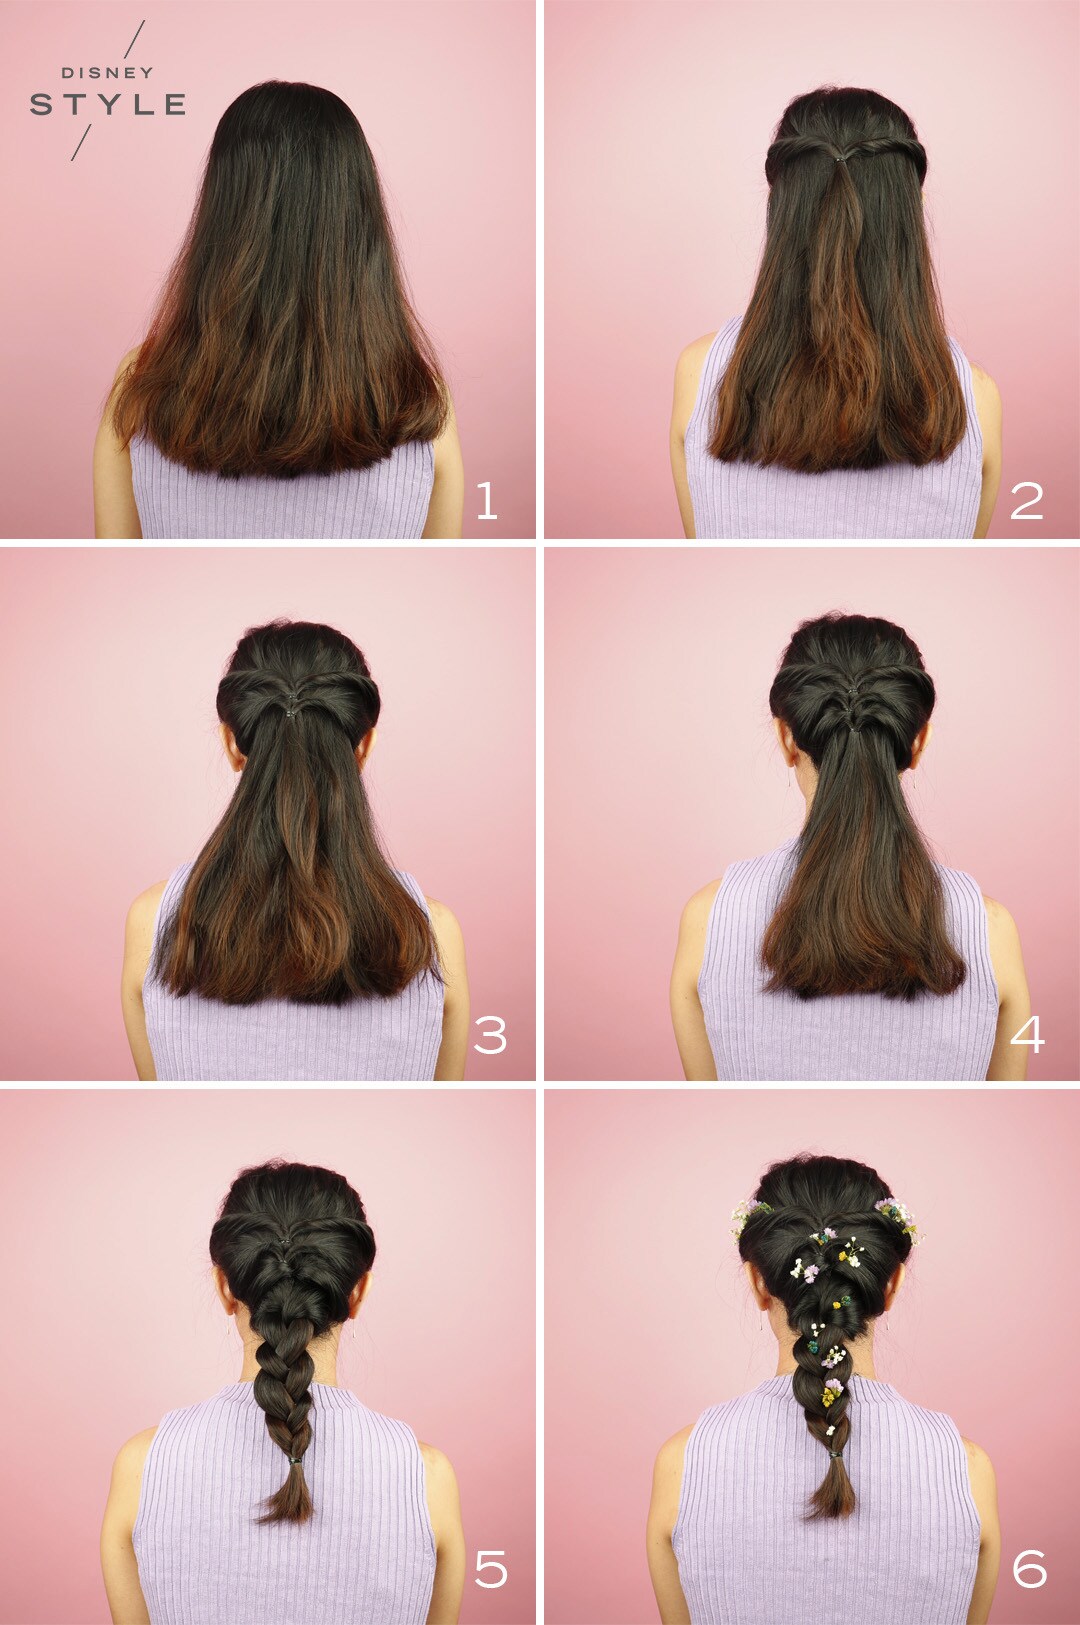 14 Disney Hairstyles For Your Little Girl